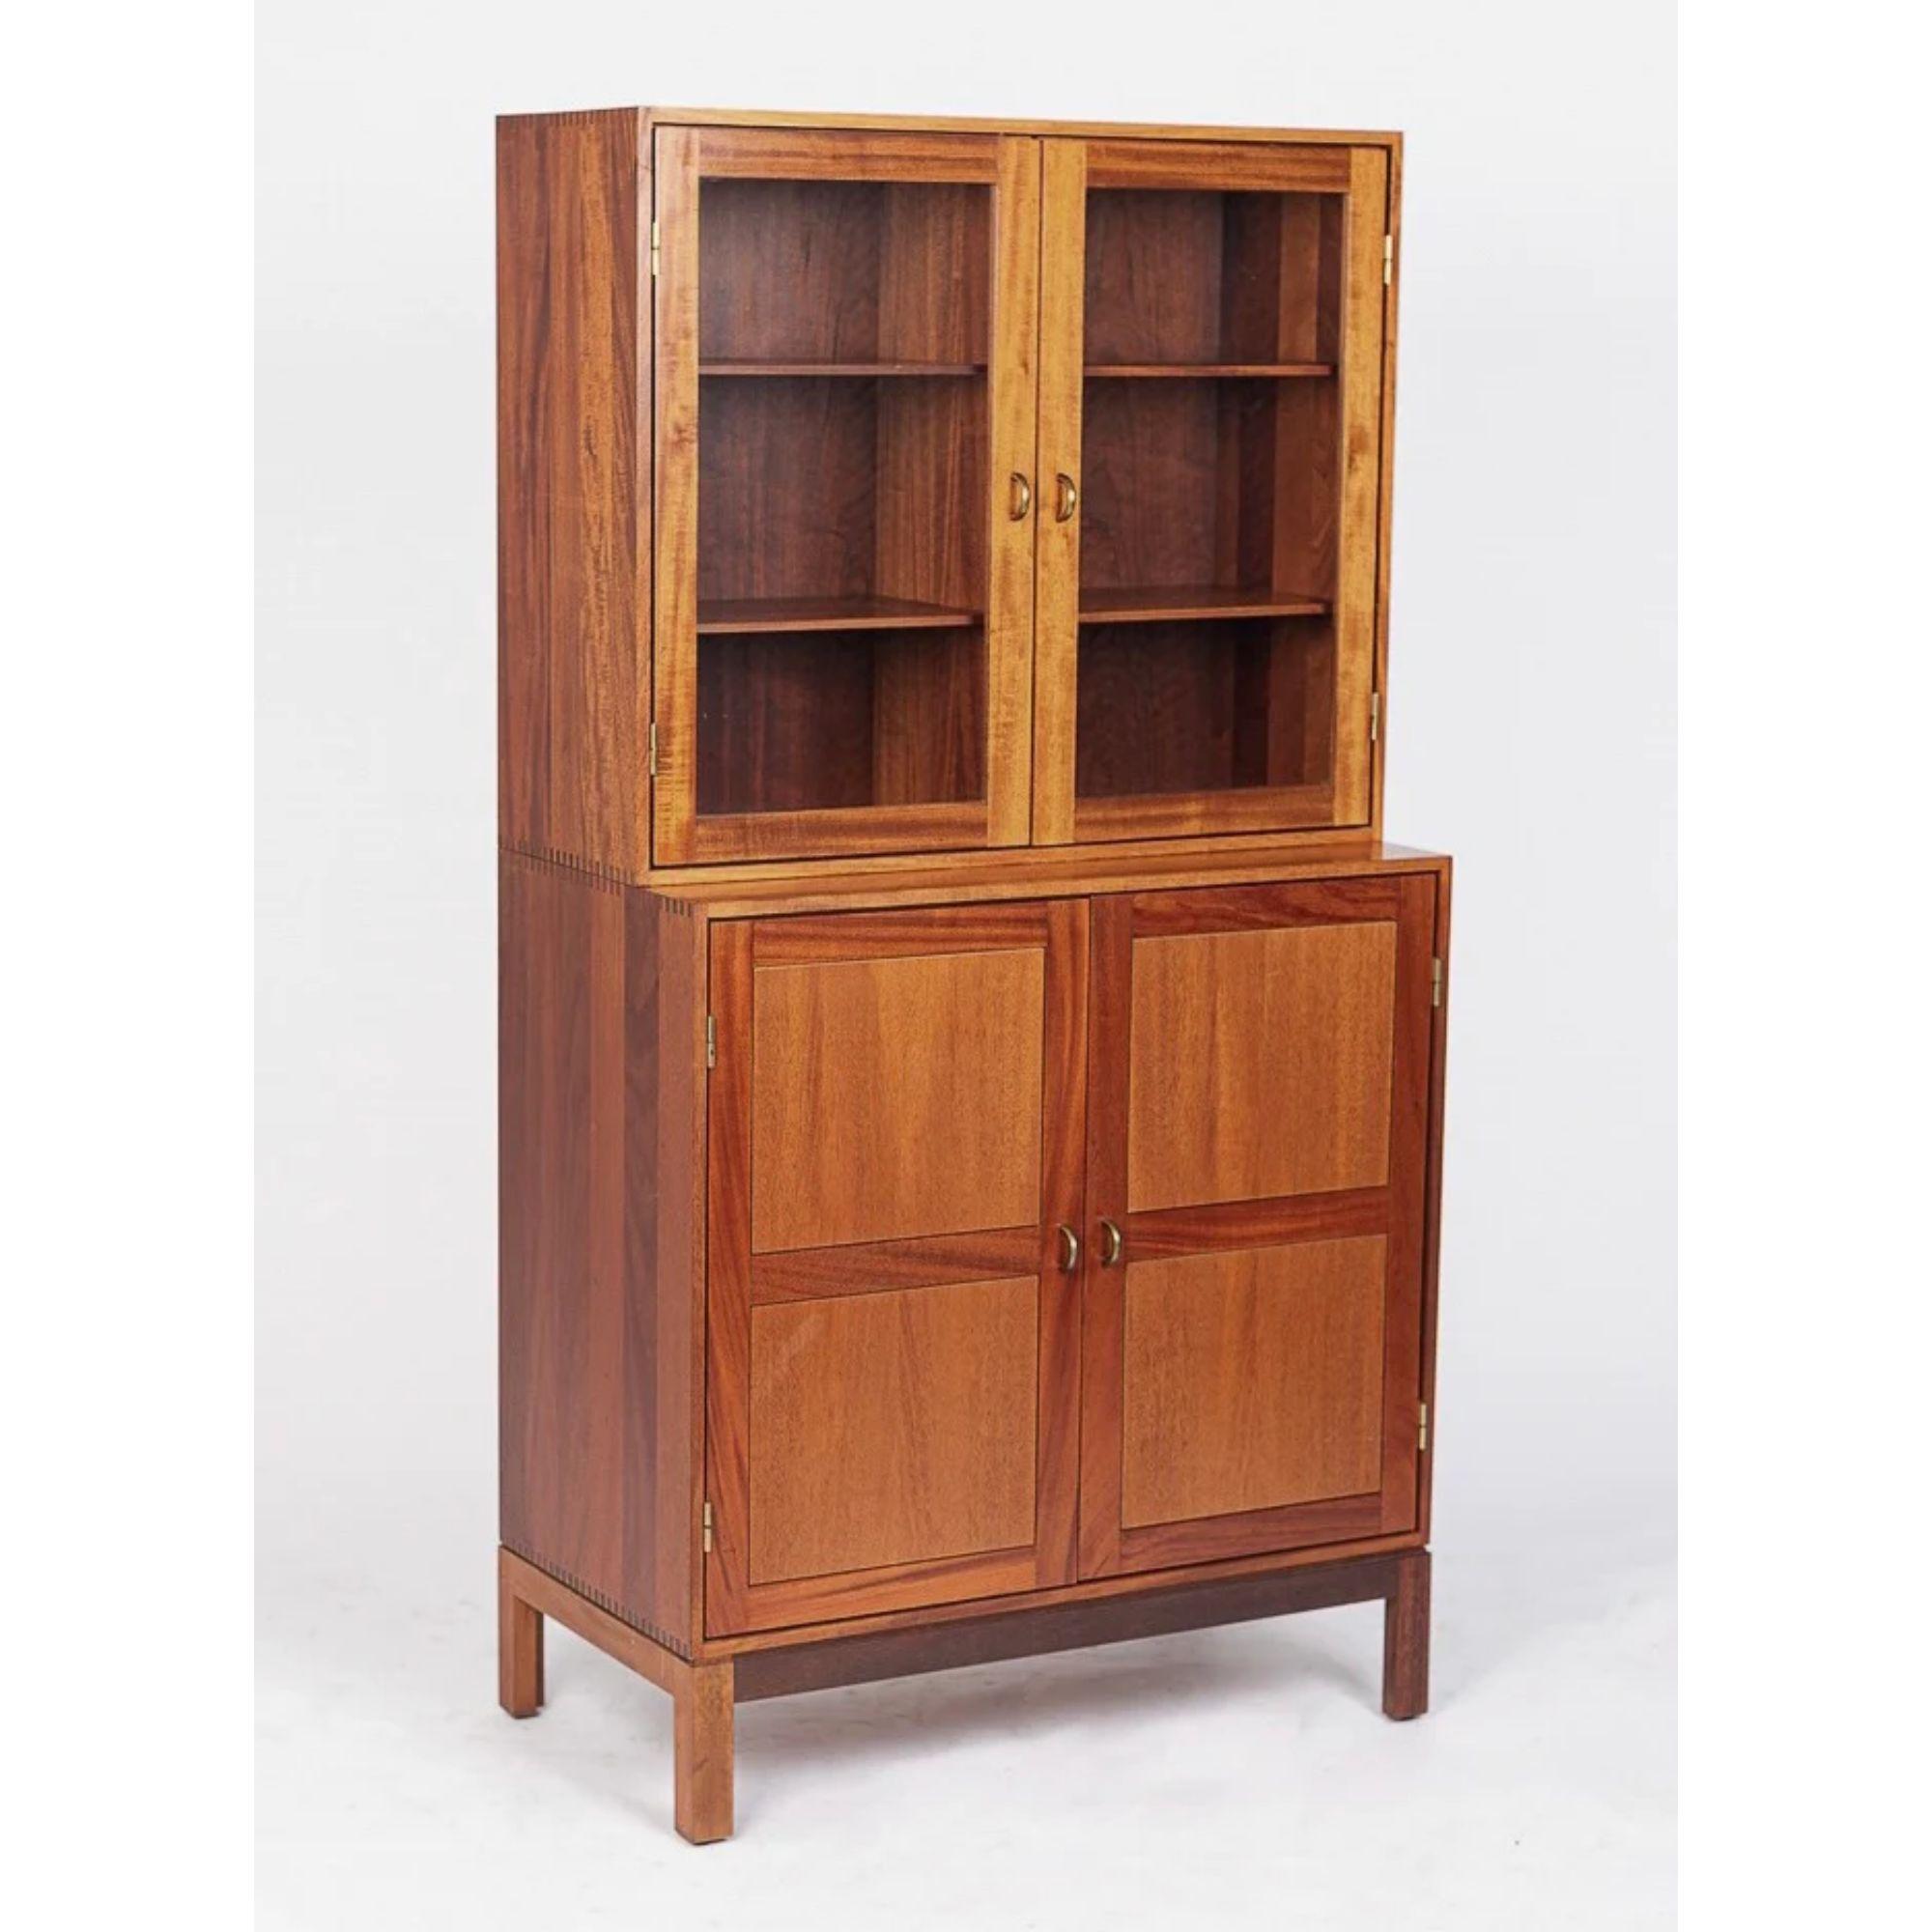 This incredible matching pair of vintage midcentury Danish modern storage cabinets was made in Denmark circa 1960. Impeccably crafted from teak wood, the cabinets feature multi-tone shades of teak with gorgeous, distinctive dovetail joinery